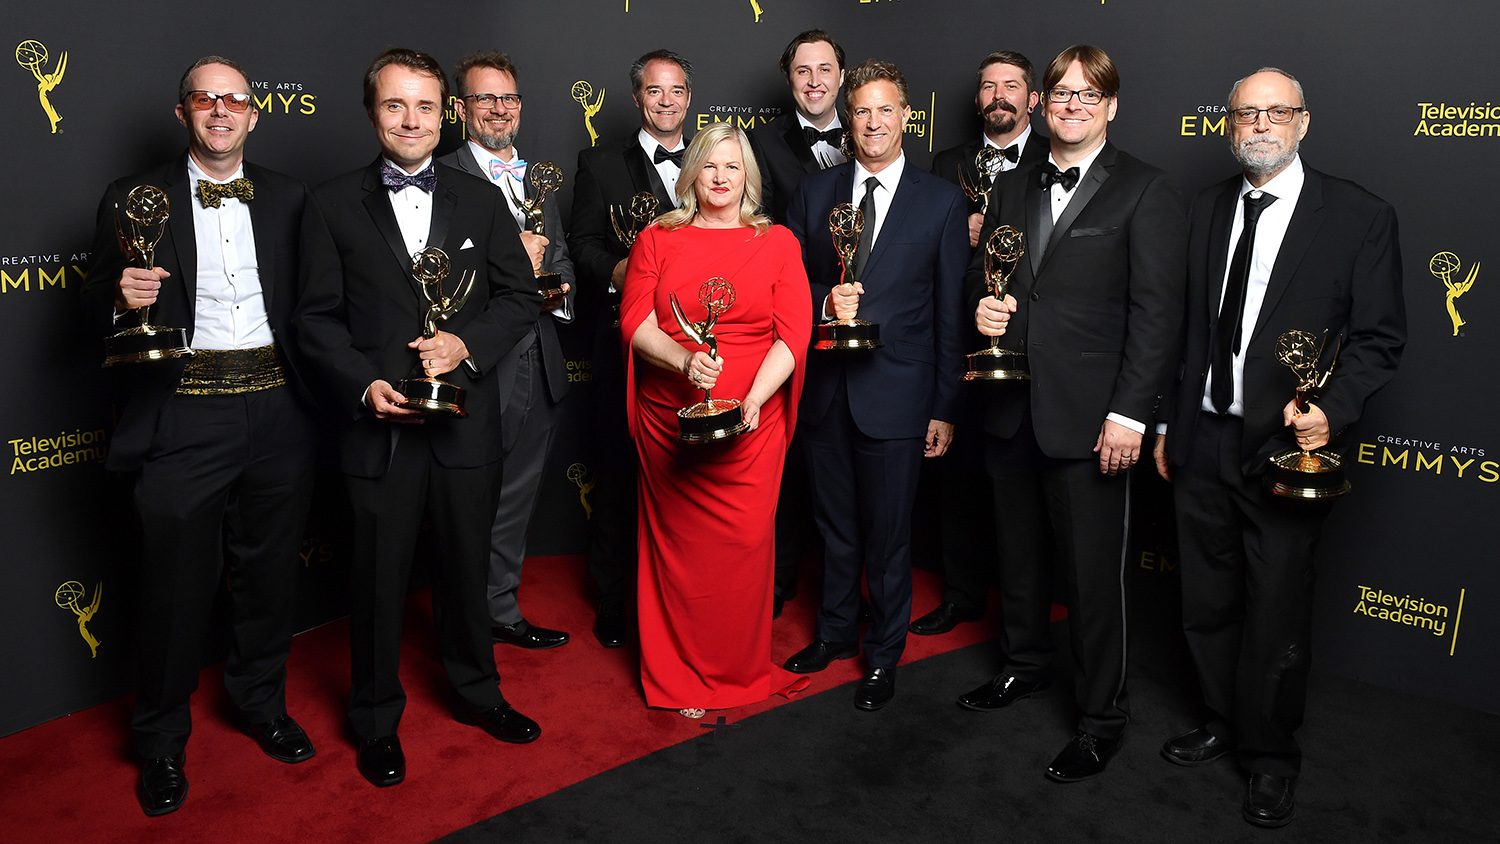 A group of people pose for a group photo holding Emmy Awards.